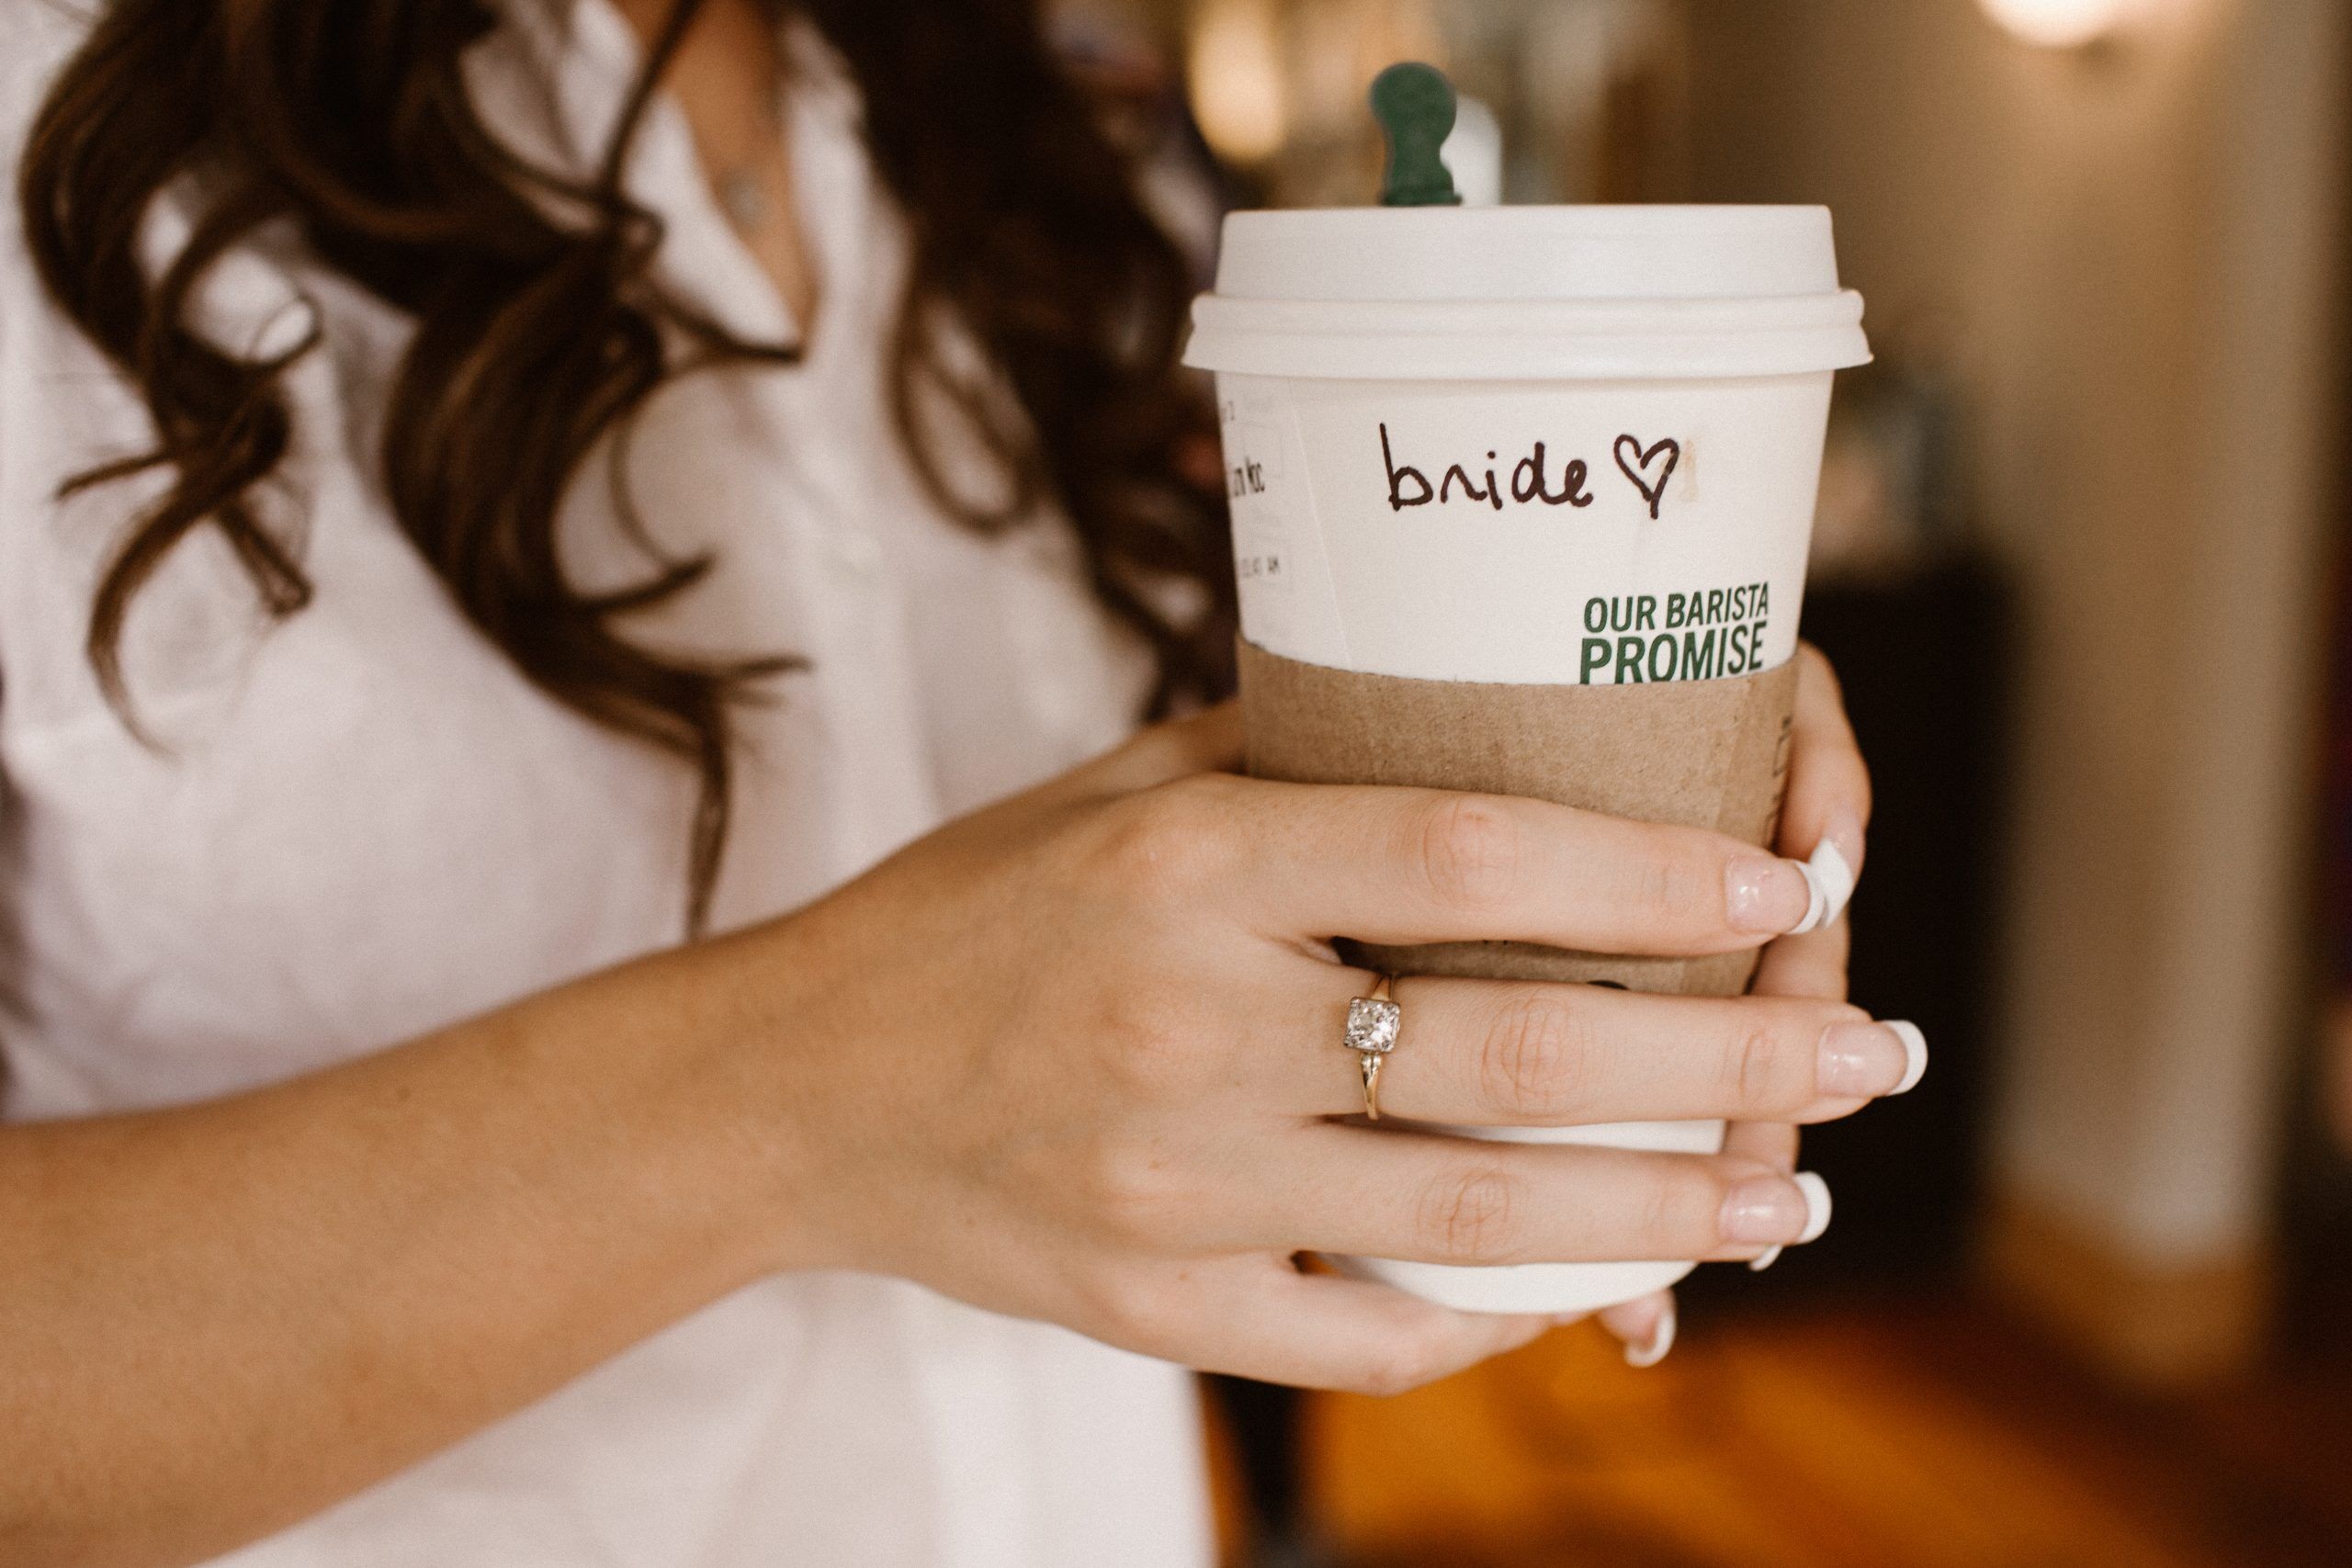 Strangers at Starbucks stepped in after brides&#8217; wedding plans were ruined